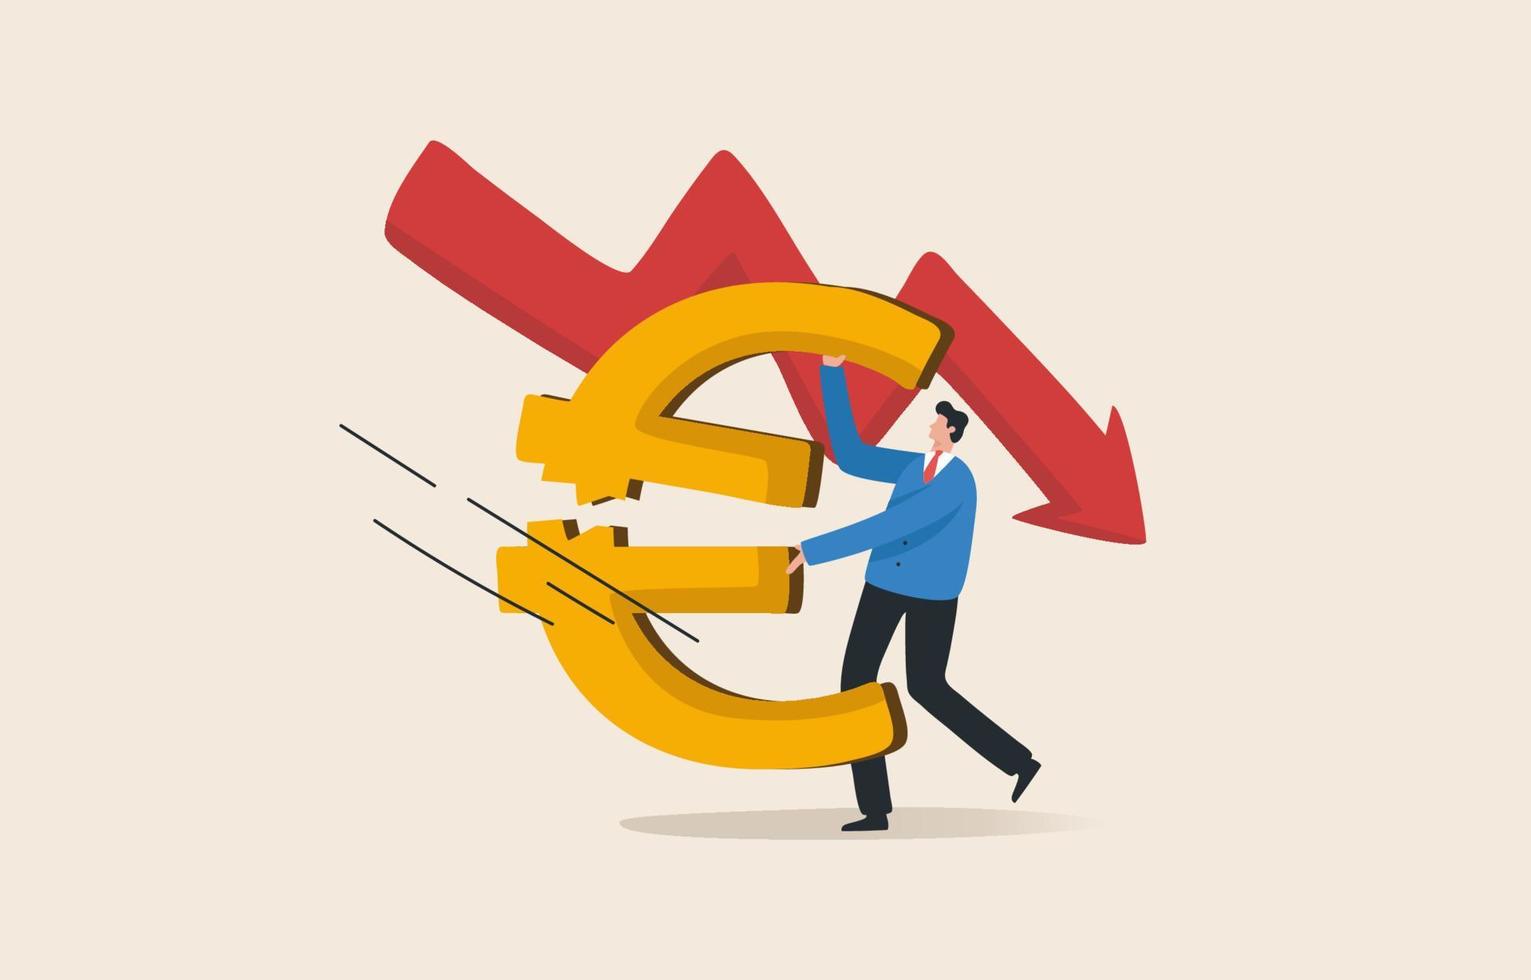 Euro Financial crisis. Euro currency crisis. Monetary policy crisis. Depression European Union economy. A businessman tries to support the falling Euro coin symbol. vector